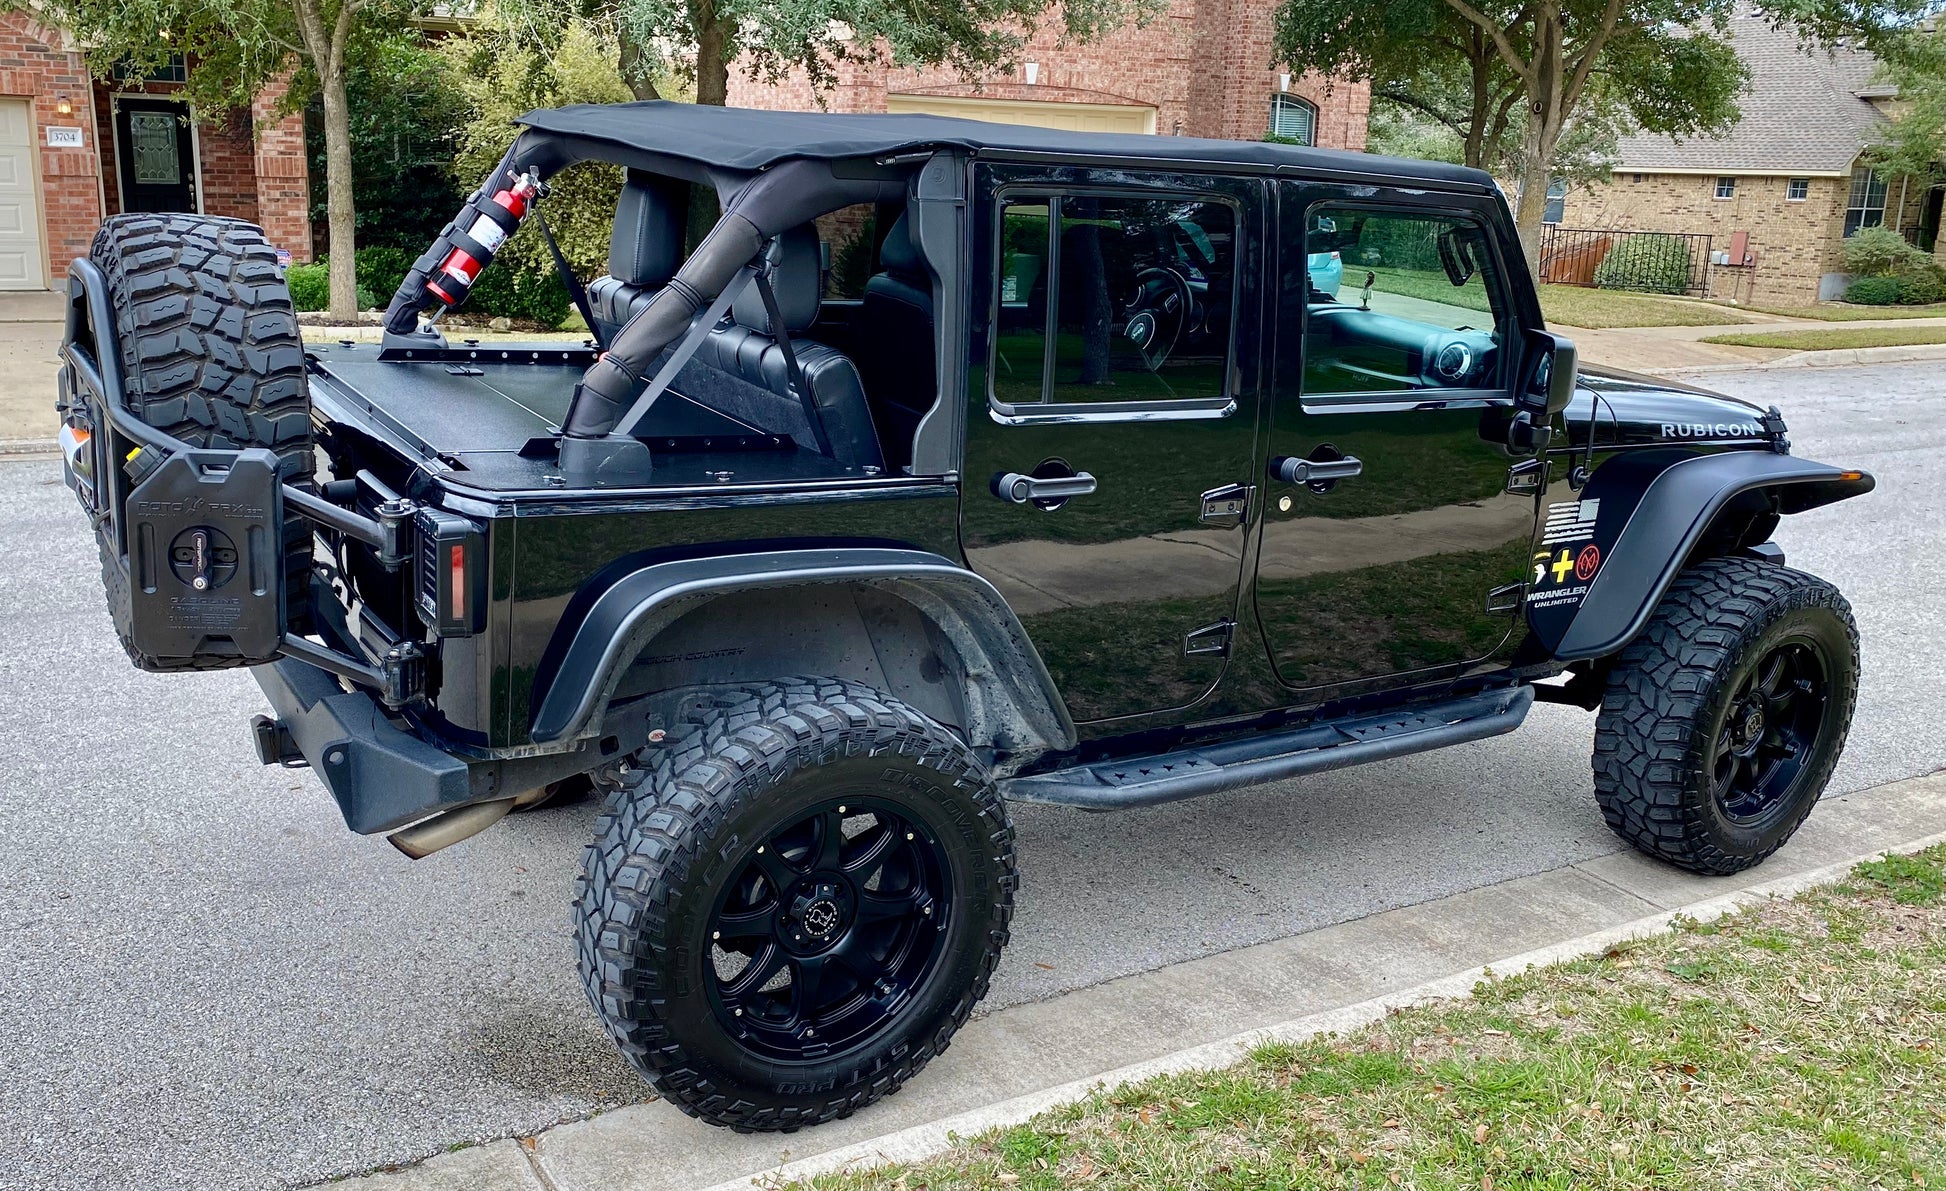 Black Jeep JKU 4-Door with the Slipstream Jeep Security Enclosure installed